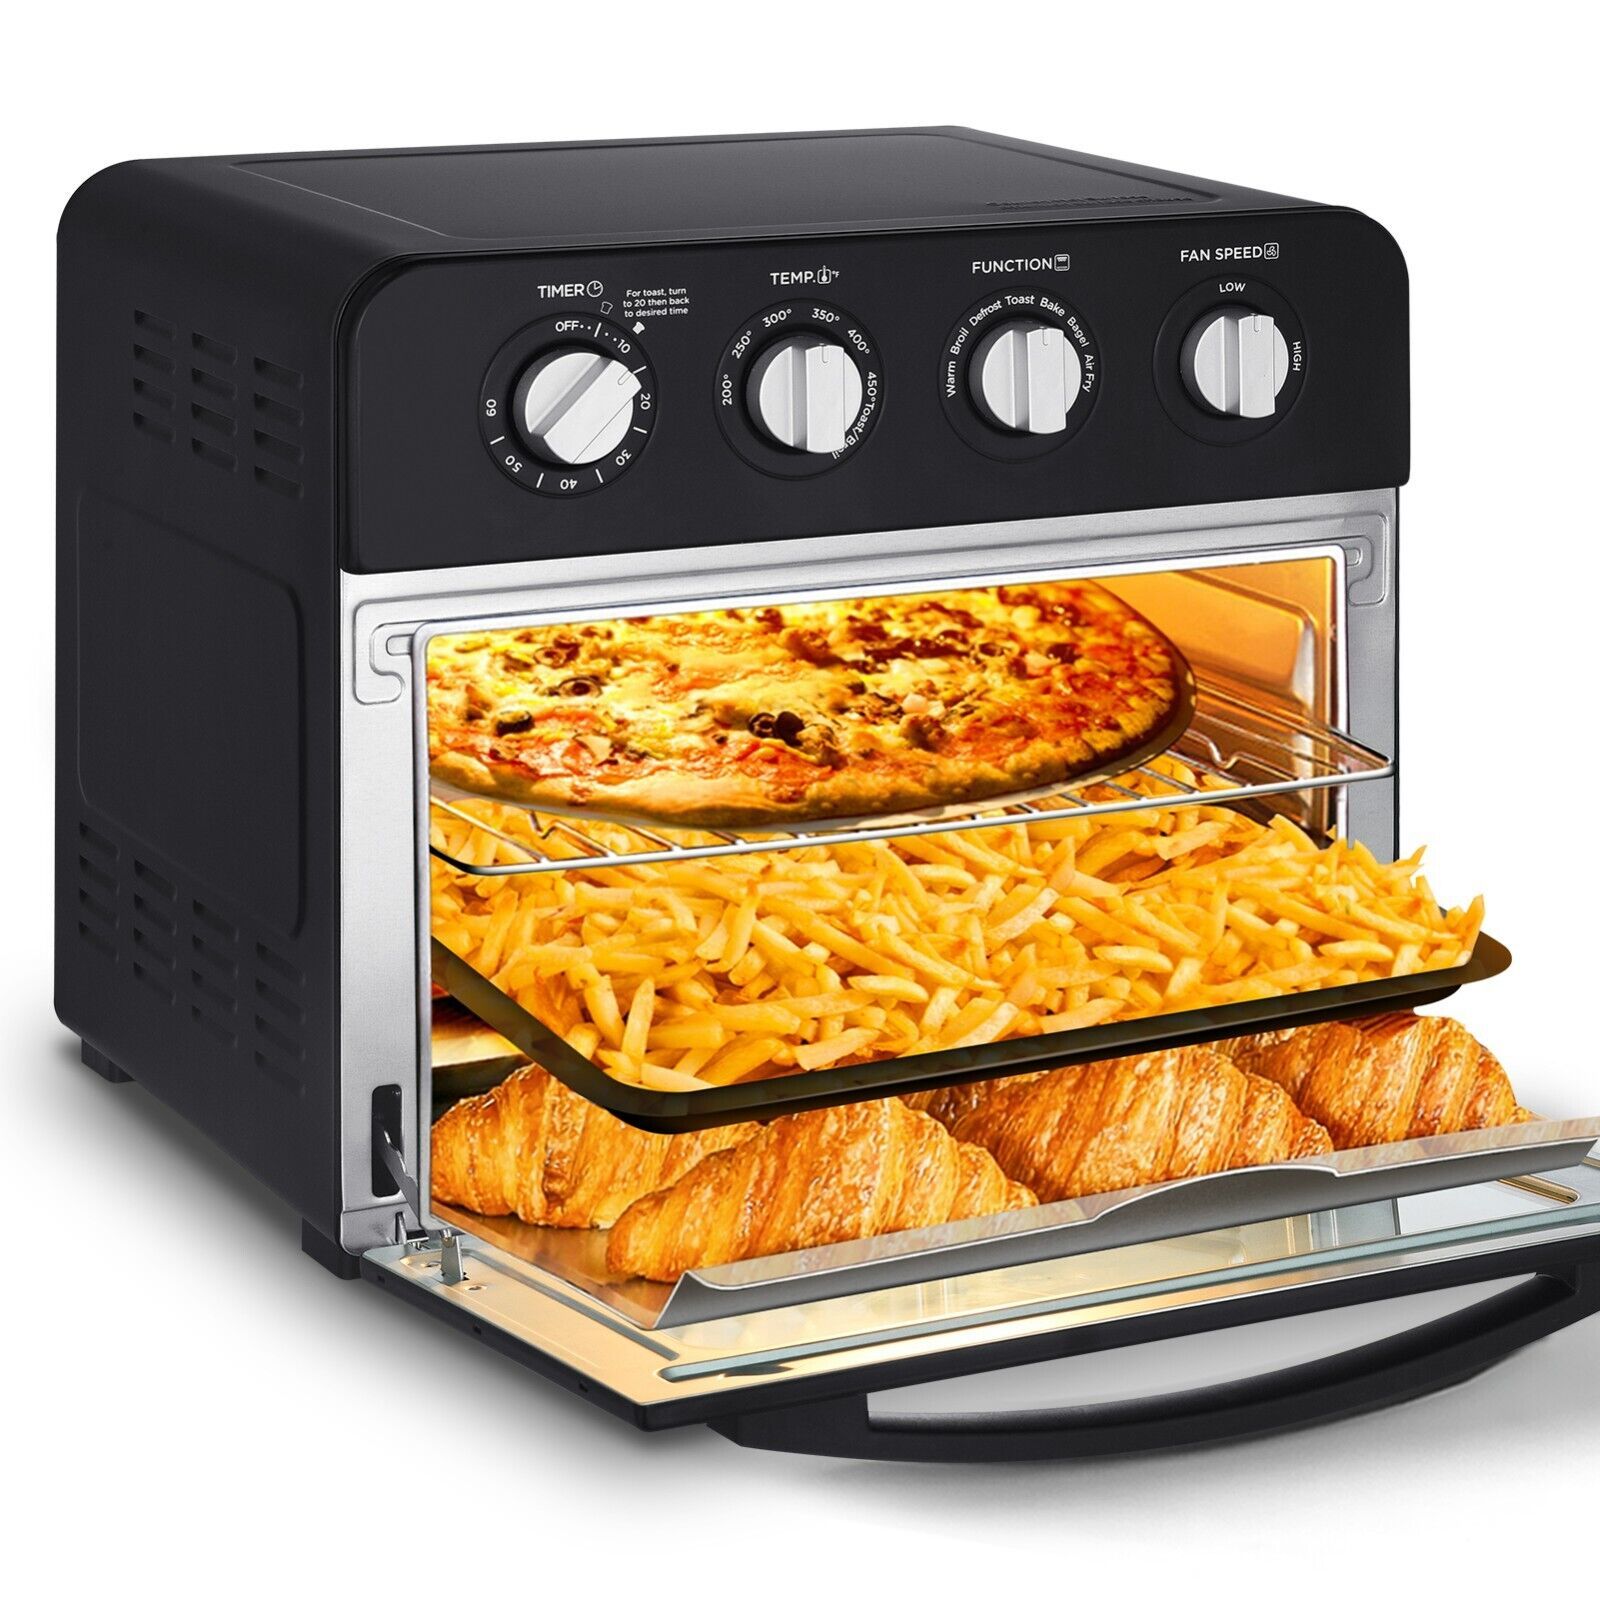 Geek Chef Air Fryer Toaster Oven Combo,16QT Convection Ovens Countertop, 4 Slice Toaster, 9-Inch Pizza, with Warm, Broil, Toast, Bake, Air Fry, Oil-fr